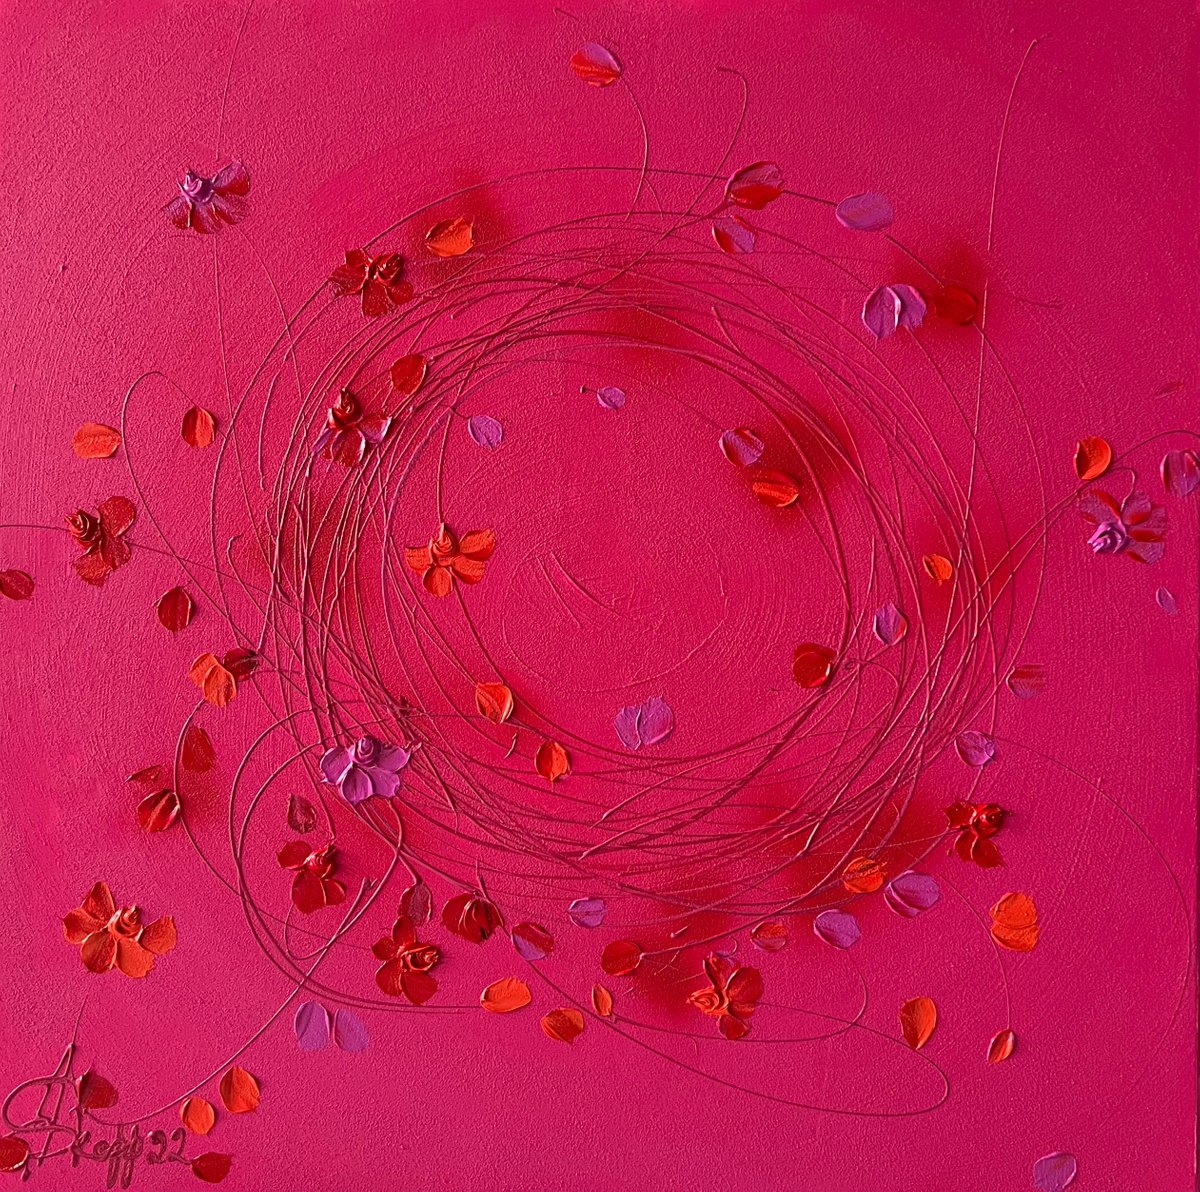 Square acrylic painting with flowers - Elysian Visions - � by Anastassia Skopp